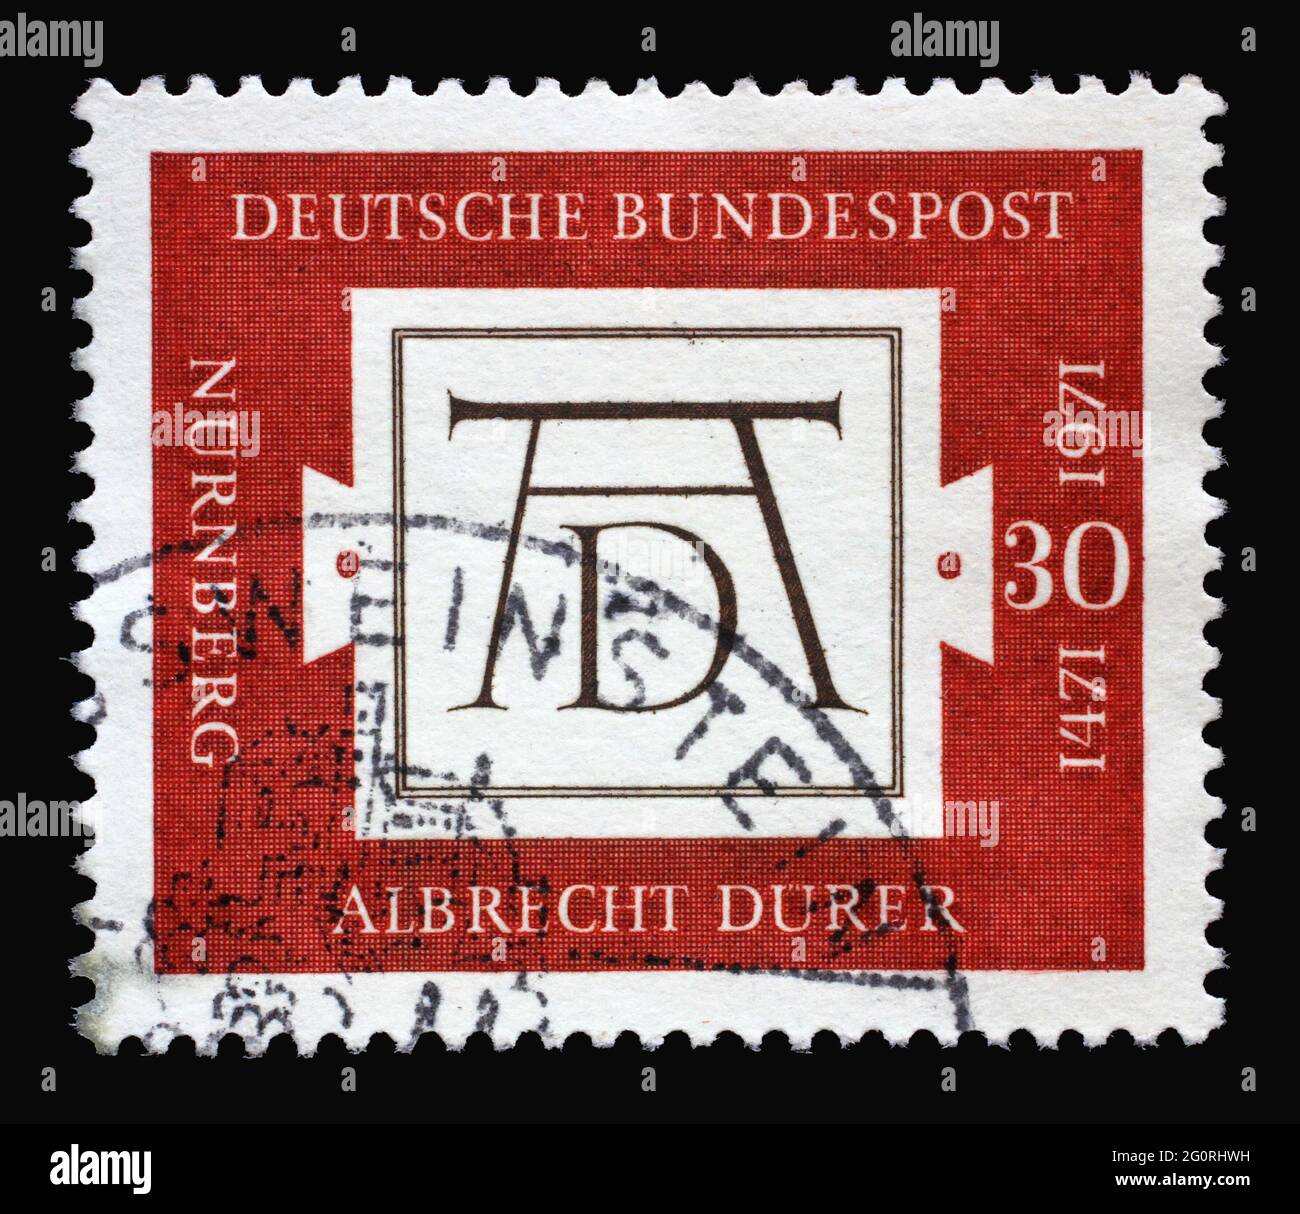 Stamp printed in Germany shows AD, Signum by Albrecht Durer (1471-1528), painter and graphic artist, 500th Birth Anniversary of Albrecht Durer, circa Stock Photo